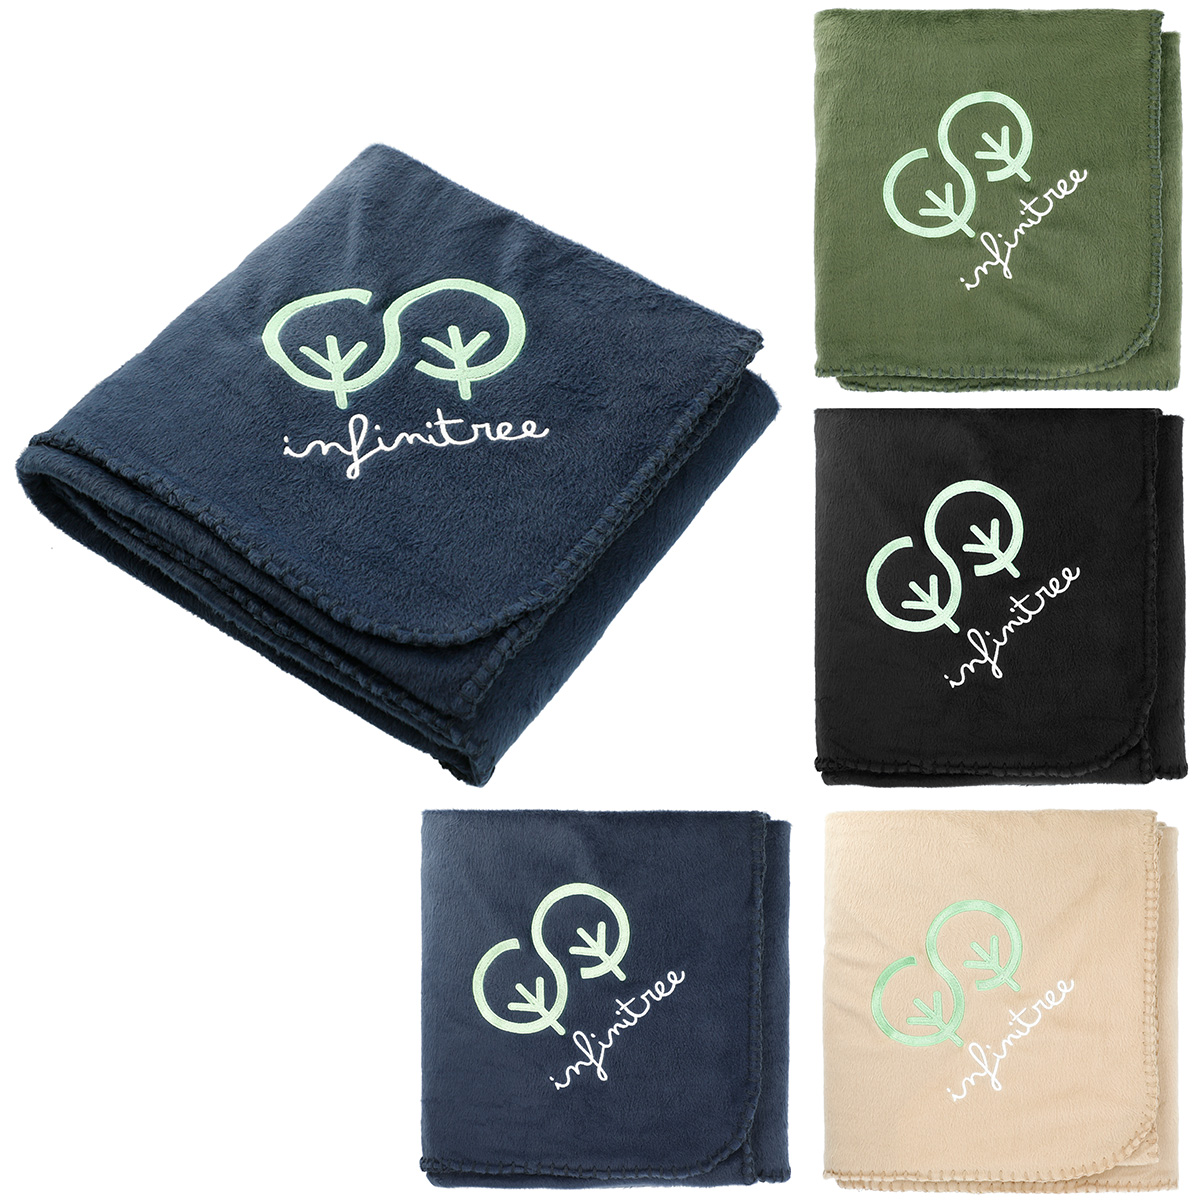 100% Recycled PET Fleece Blanket with Canvas Pouch Recycled Fleece Blanket